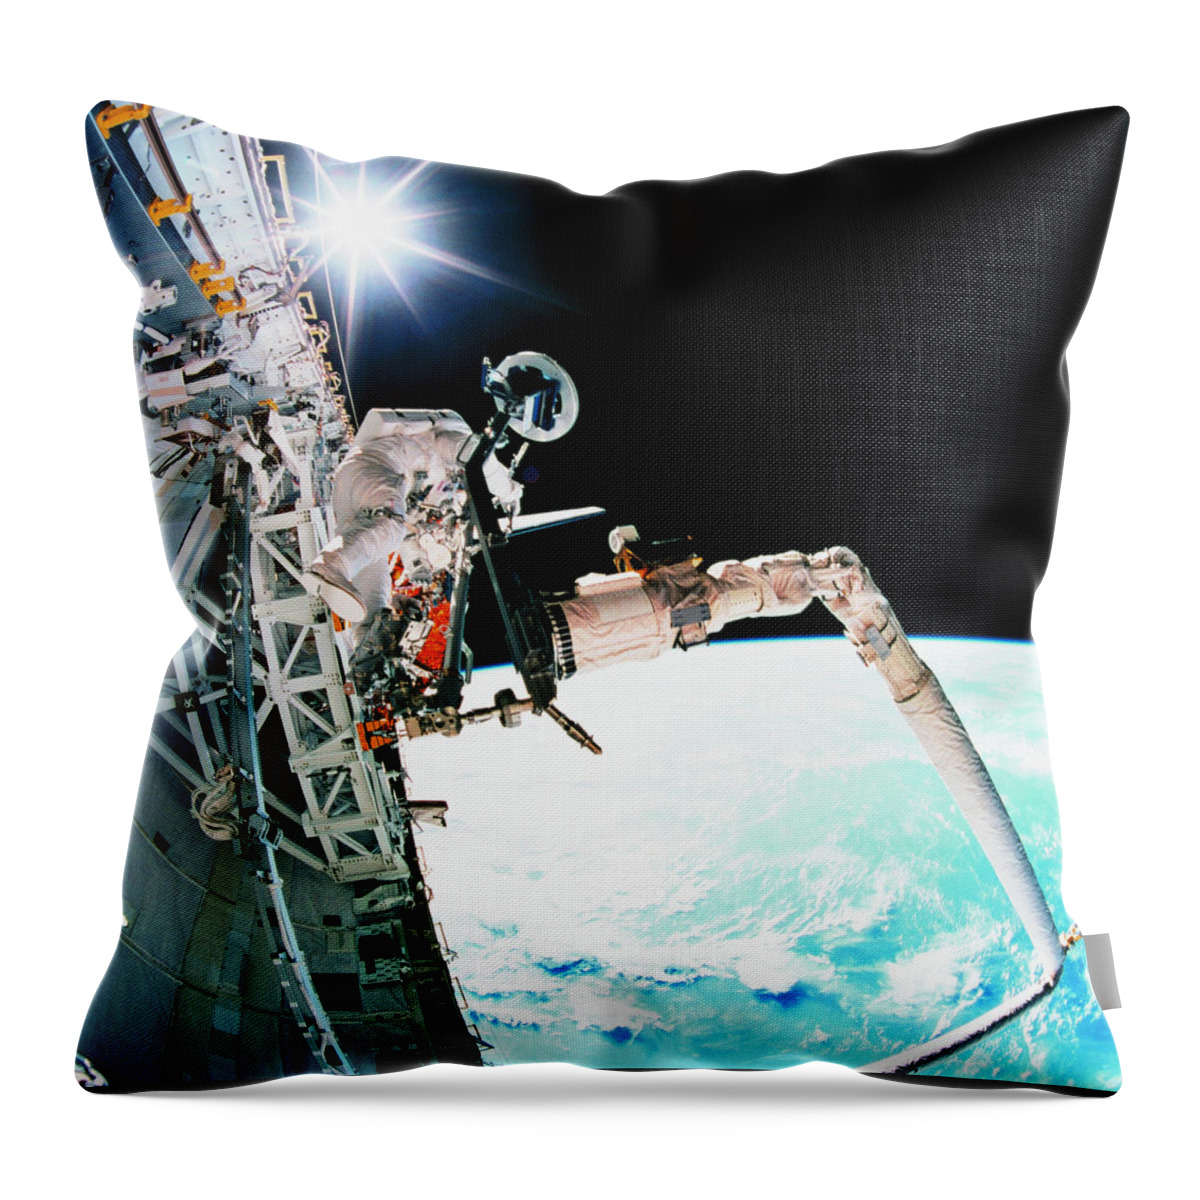 Black Color Throw Pillow featuring the photograph An Astronaut Working In Space by Stockbyte